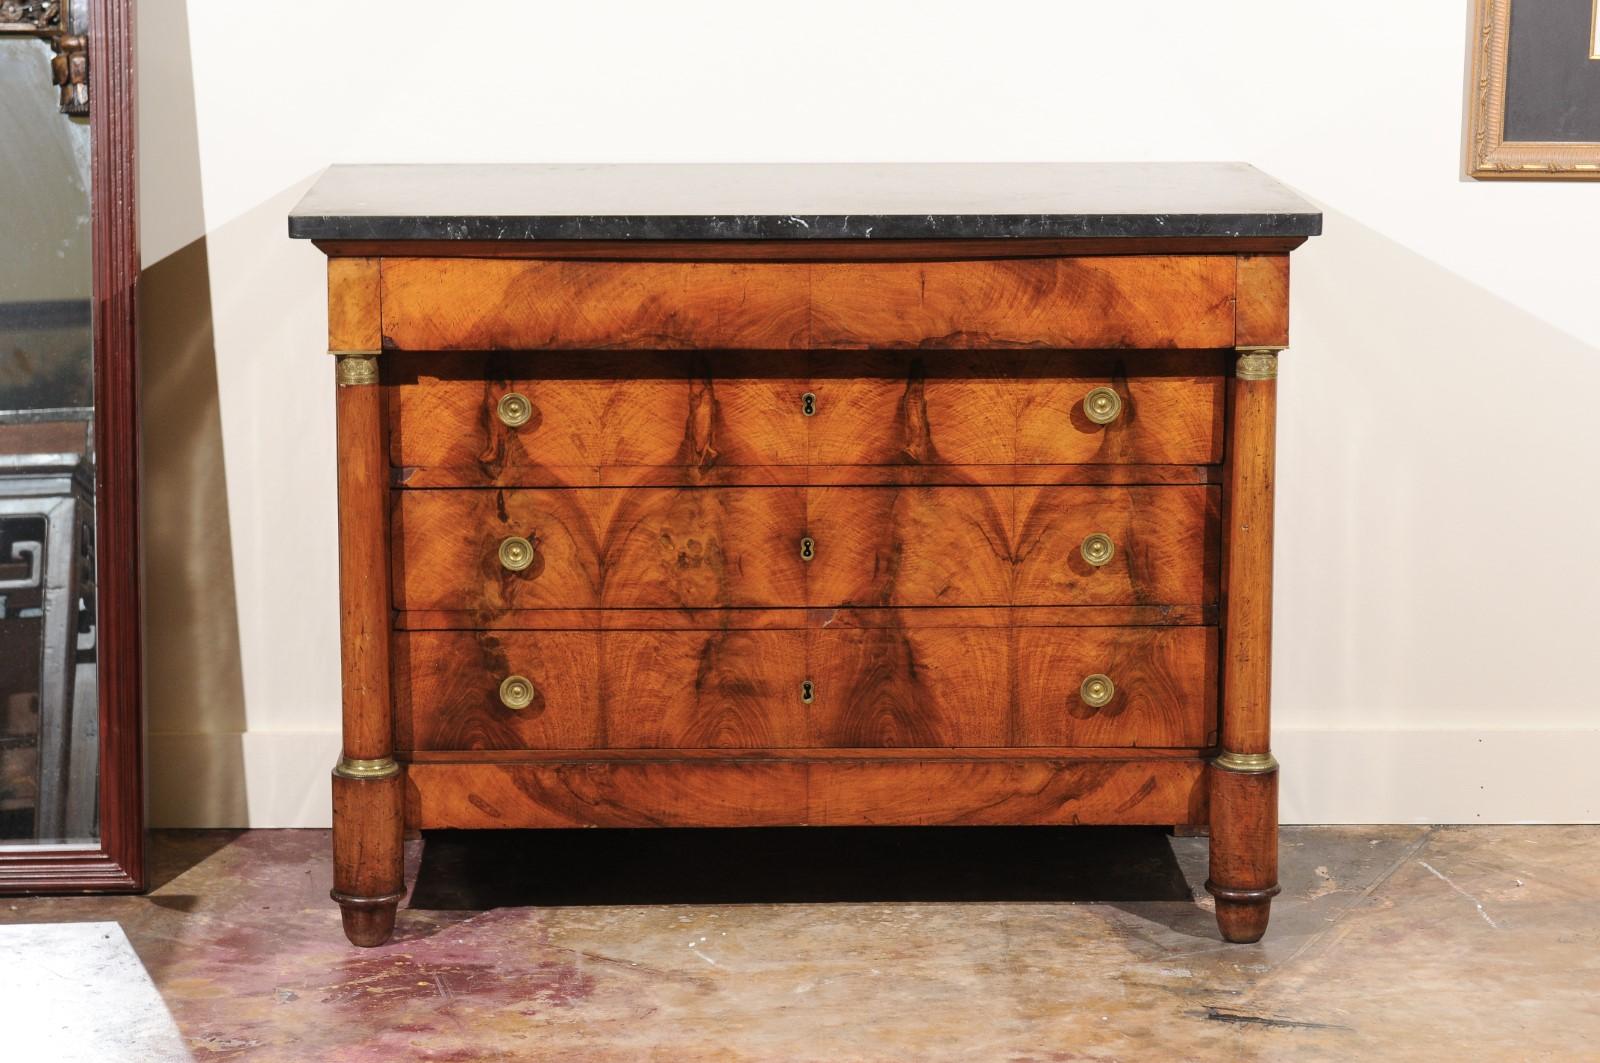 A beautiful Empire chest of bookmatched burled walnut...wonderful patina. The top drawer is hidden in that it has no hardware. Below are three drawers with bronze hardware. ormolu-mounted columns are on both sides supported by bun feet on the front.